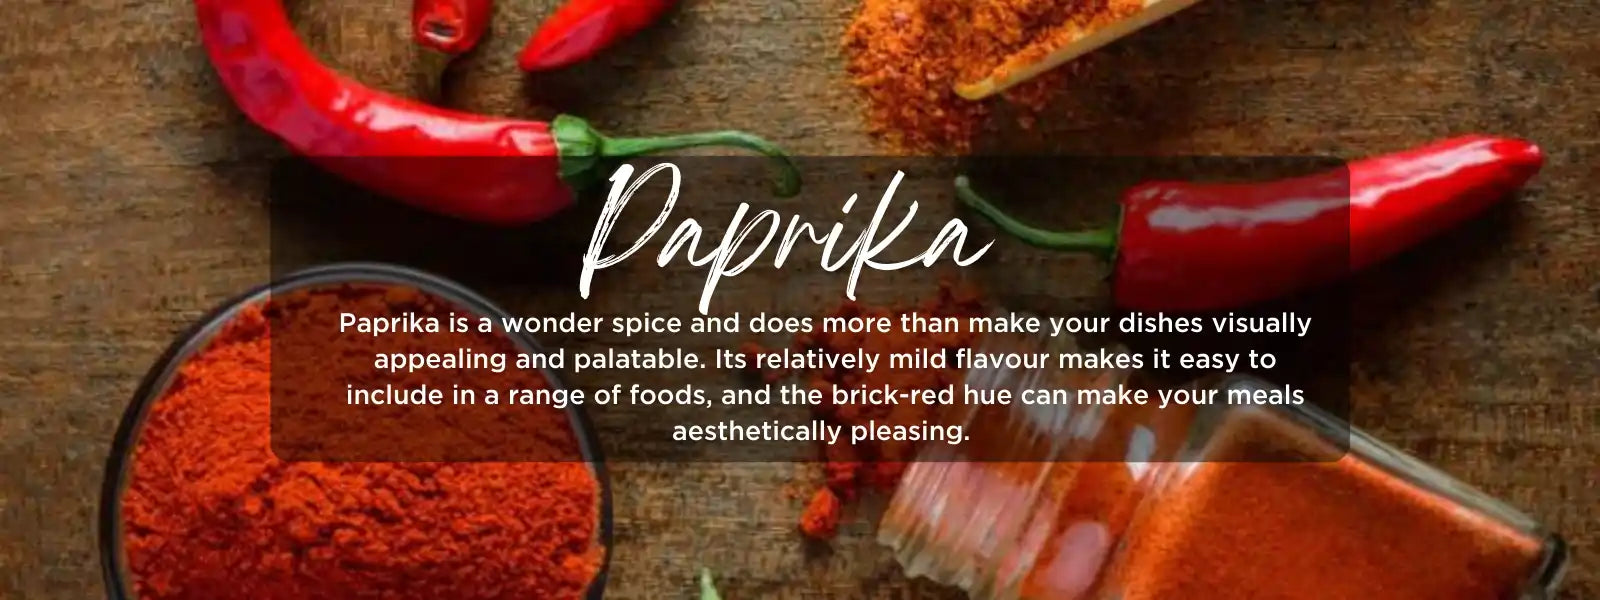 Paprika - Health Benefits, Uses and Important Facts